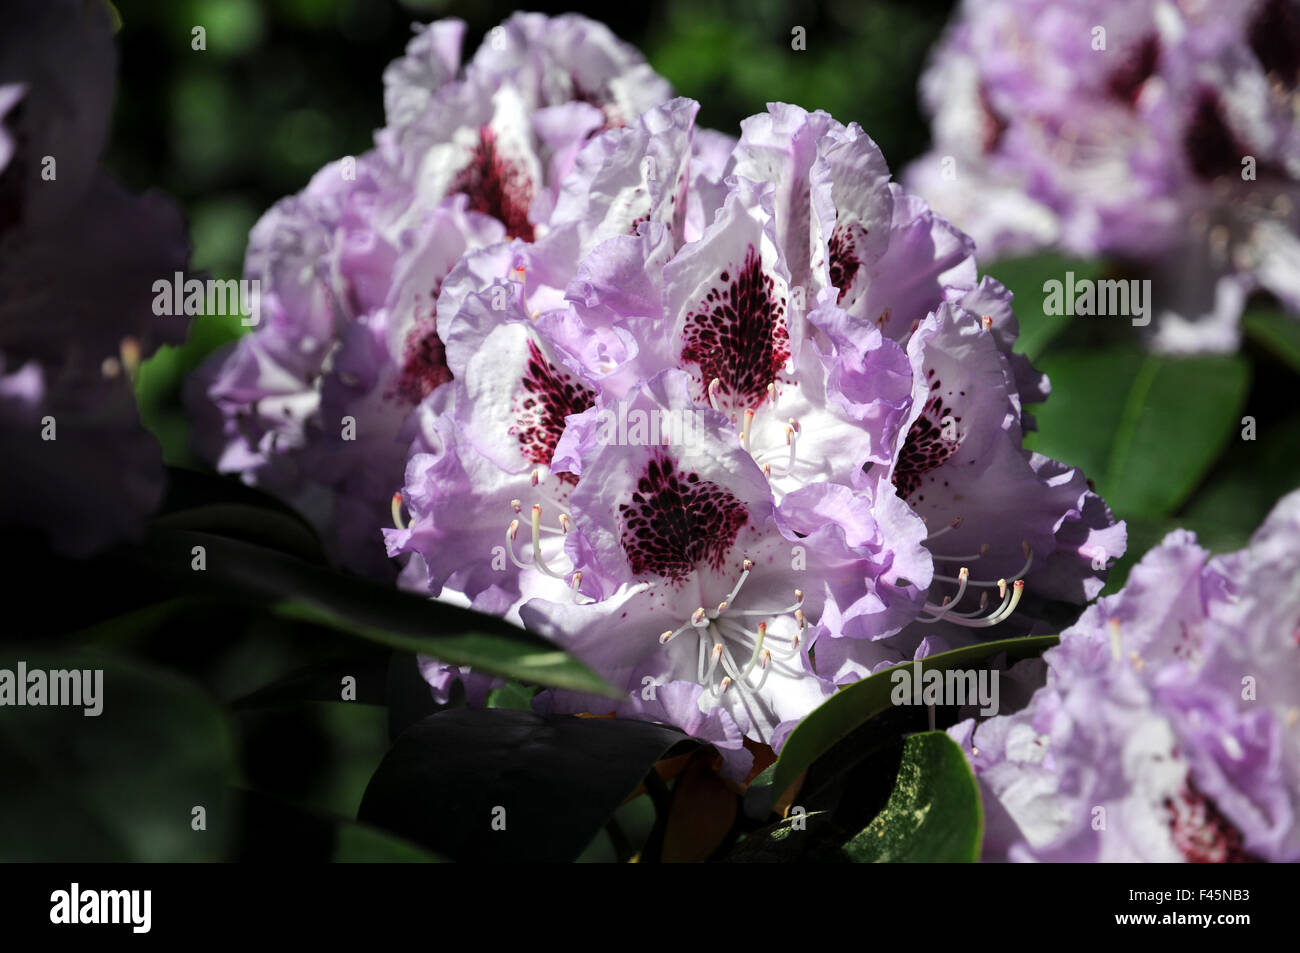 Rhododendron Blue Peter Stock Photo